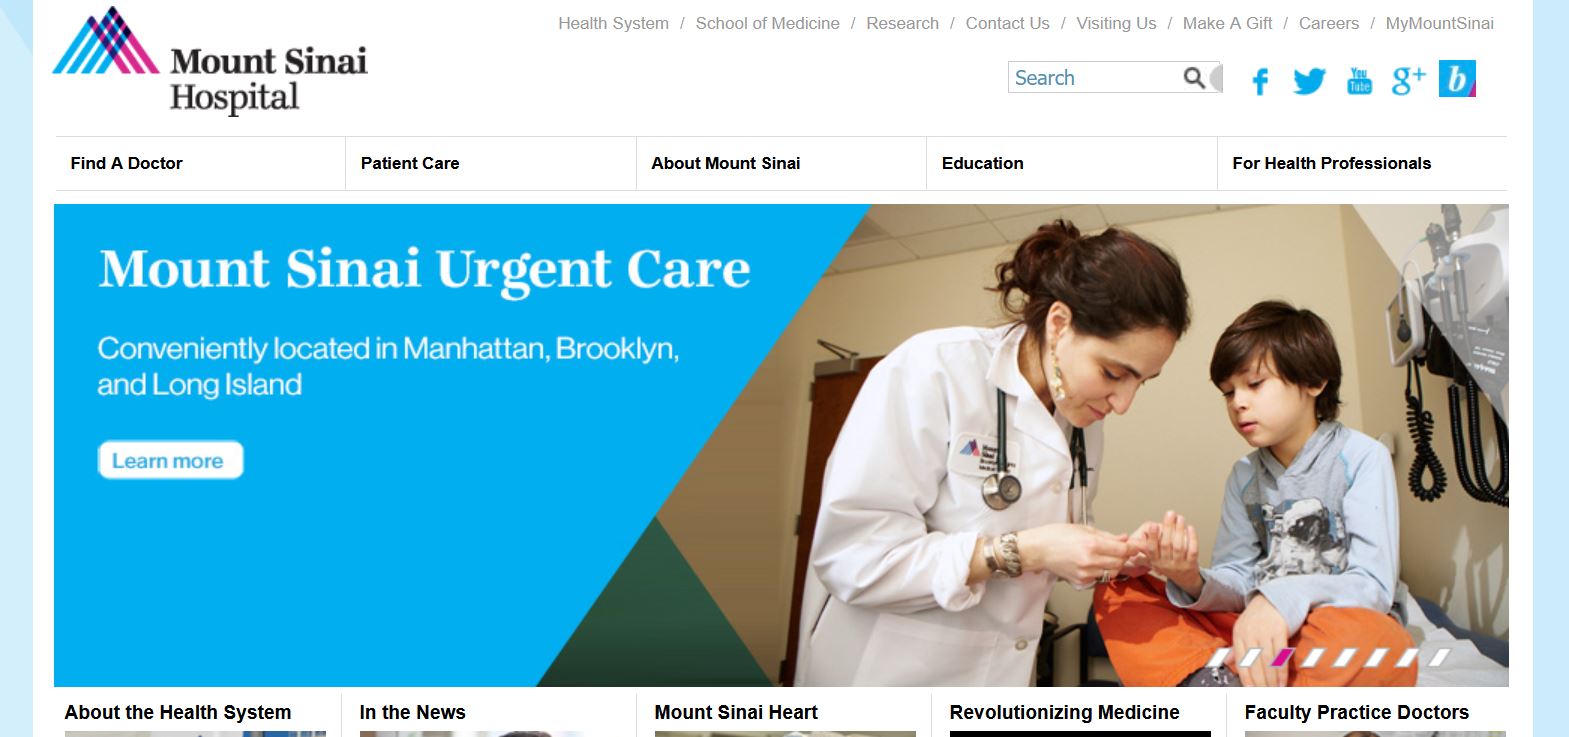 A screenshot of the Mount Sinai homepage from February 2015.